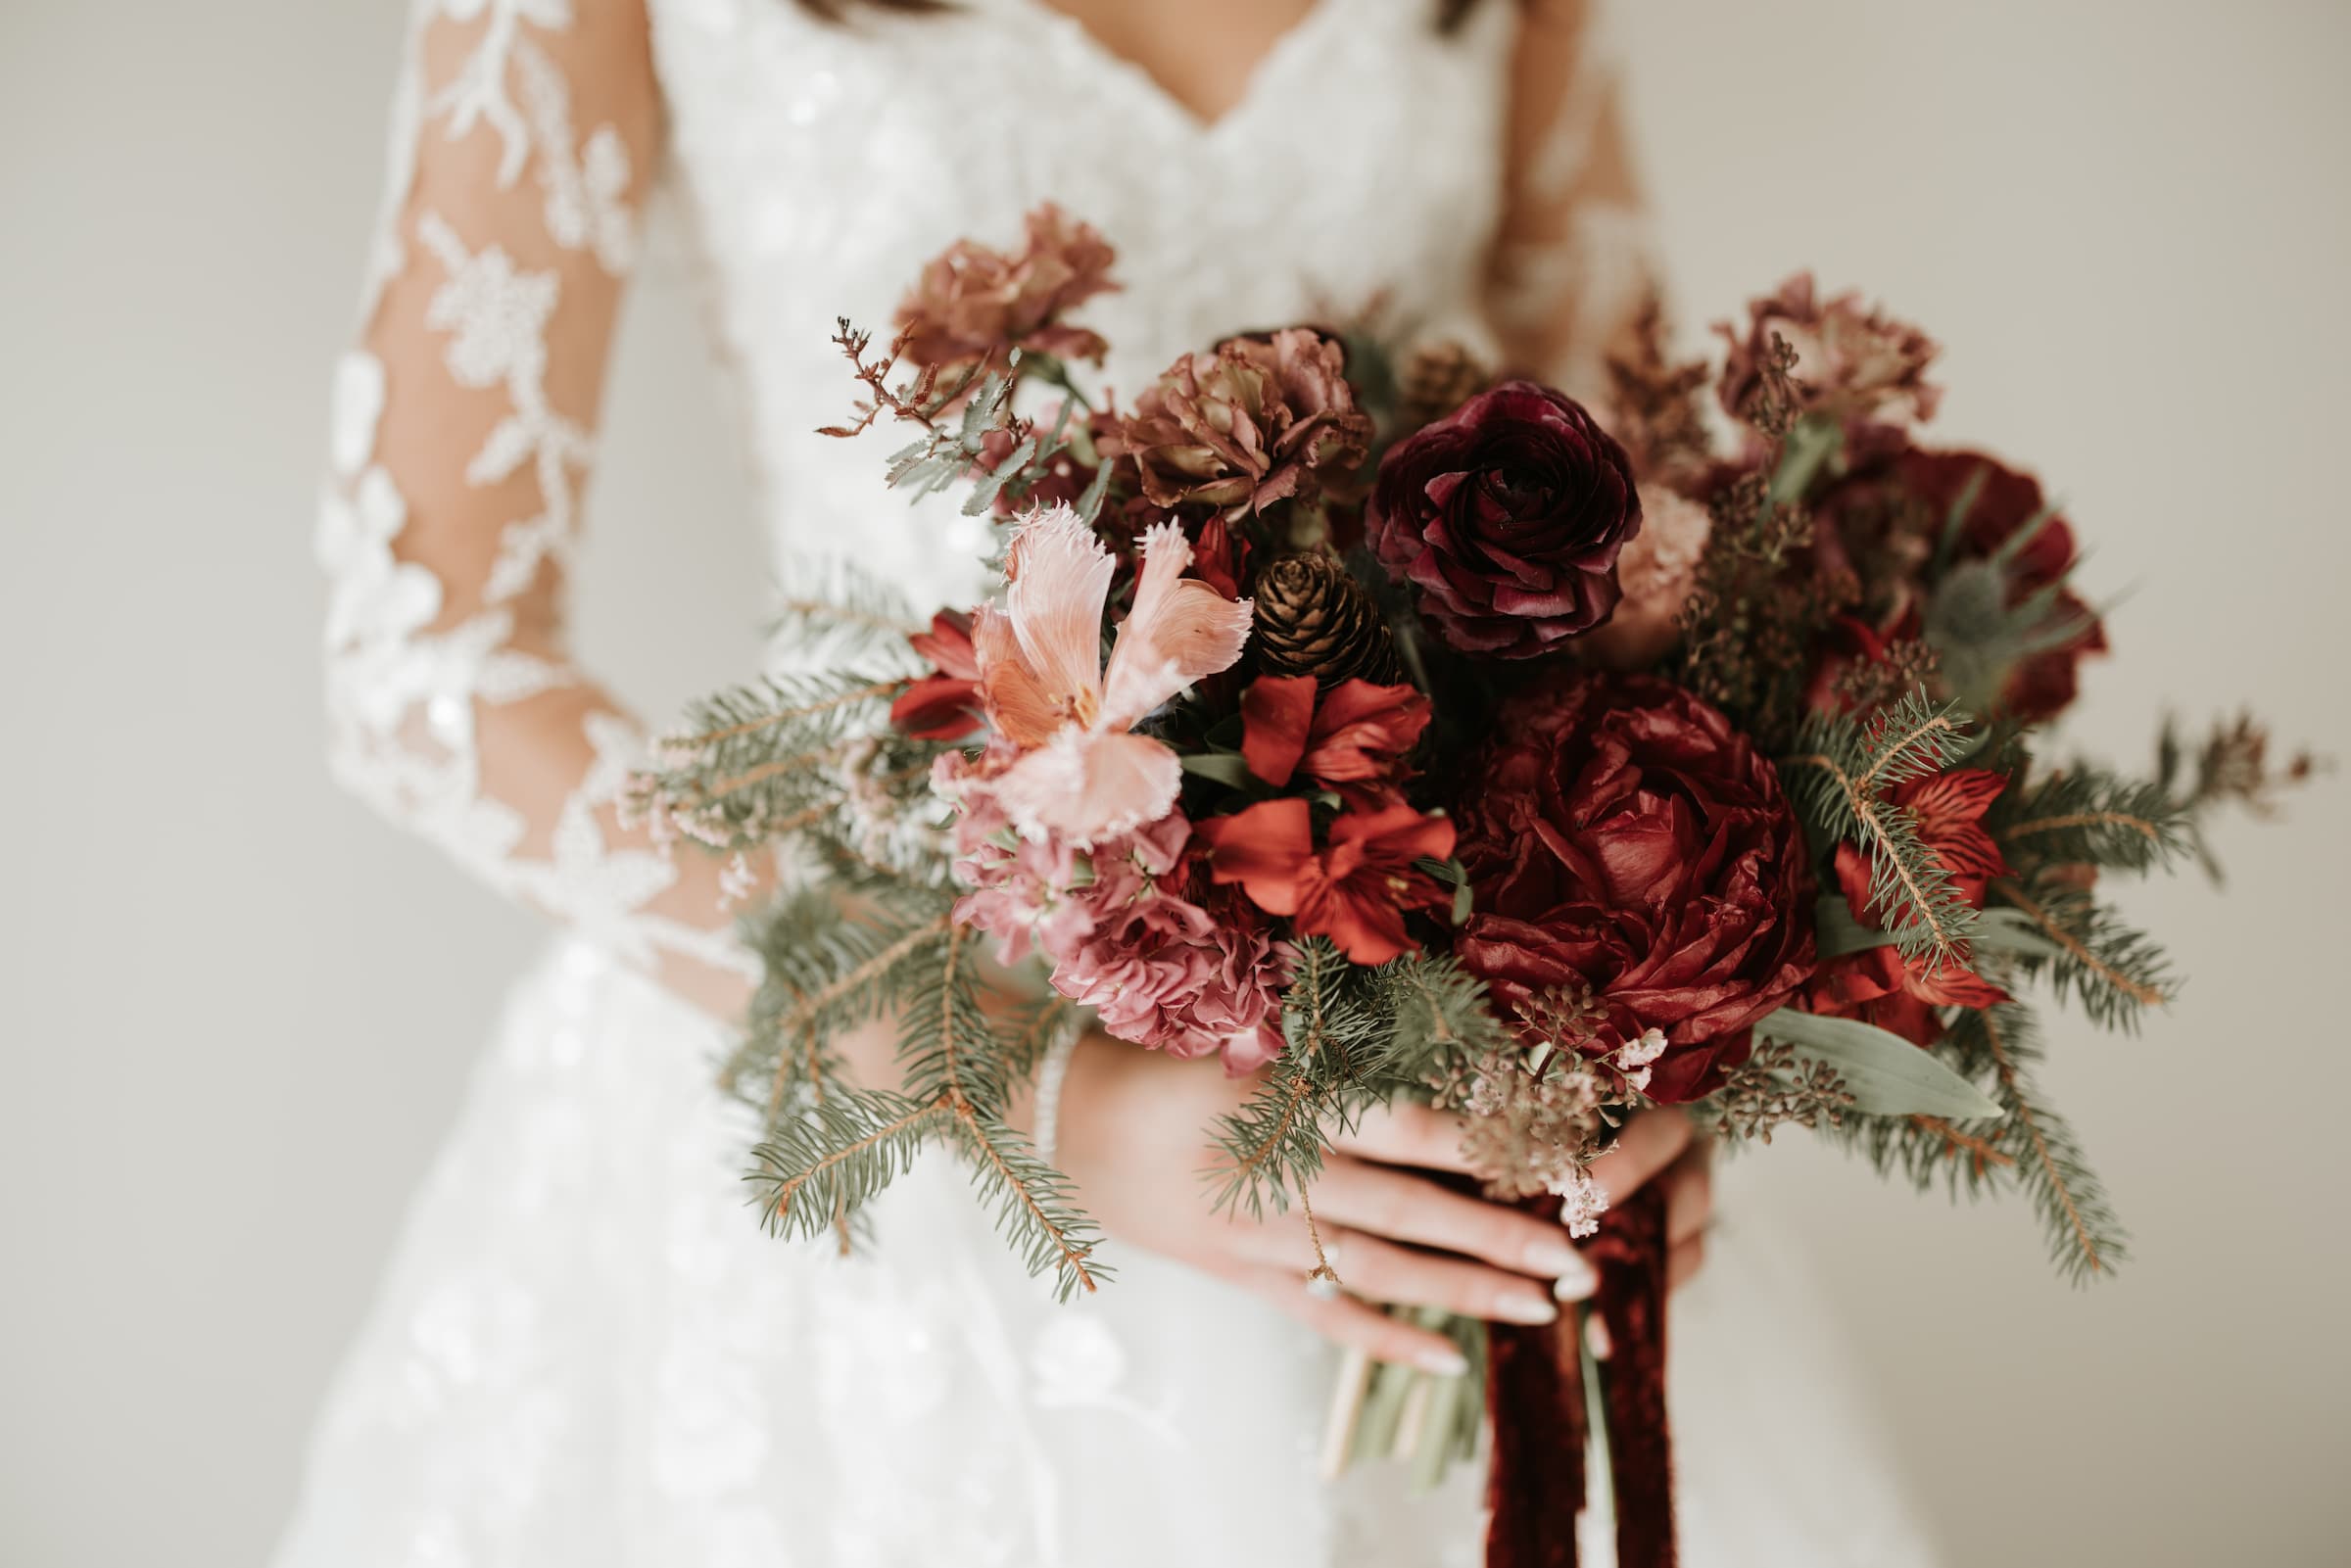 A closeup of a burgundy, red and pink bouquet in focus held by a bride in a white gown with lace sleeves.